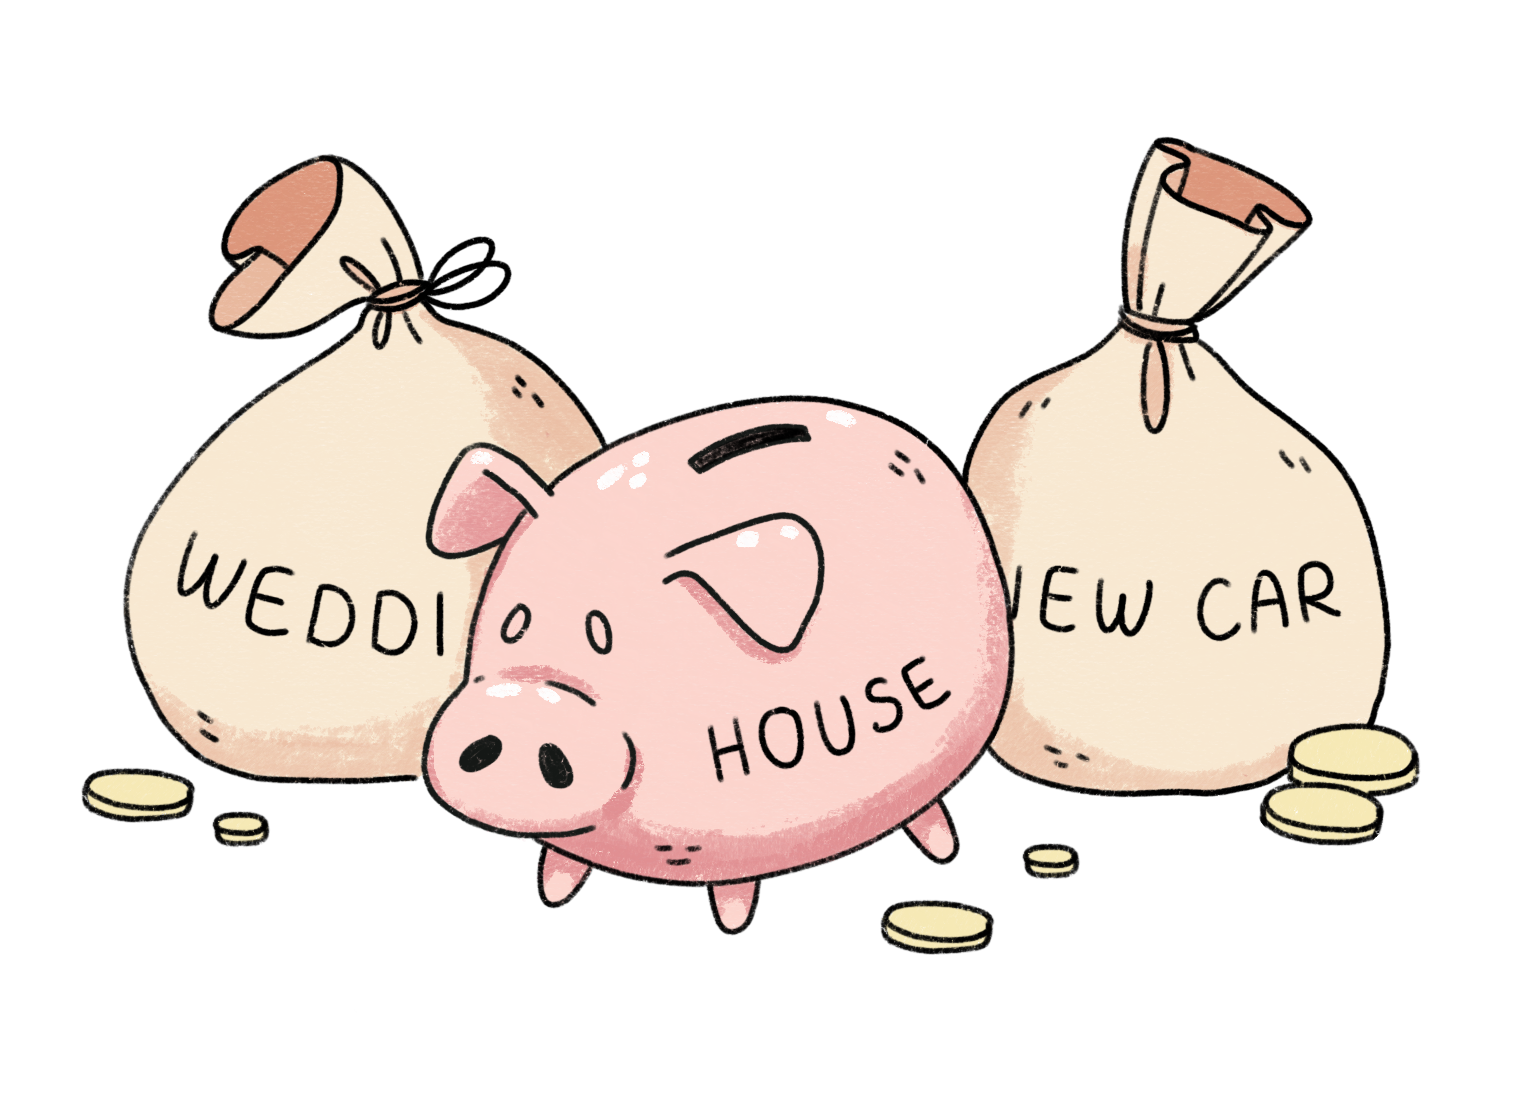 An illustration representing savings pots. The first is a sack of money with 'Wedding' written on, next is a piggy bank labelled 'House', and lastly there is another sack of money with 'New car' on it.